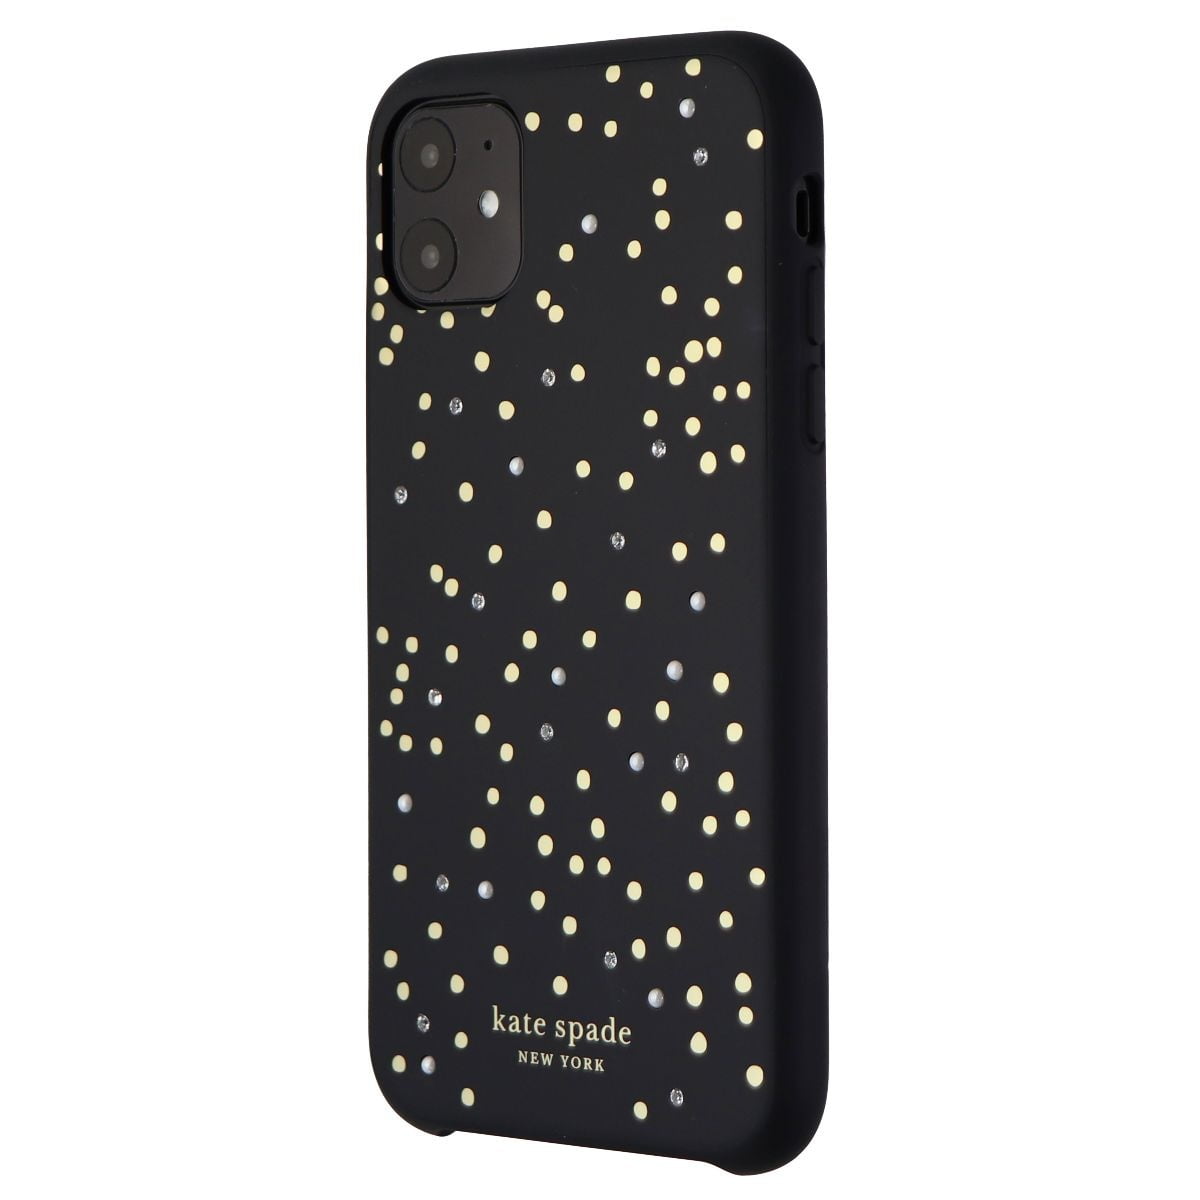 Kate Spade New York Soft Touch Case for Apple iPhone 11 - Black/Disco Dot  Gems | Walmart Canada